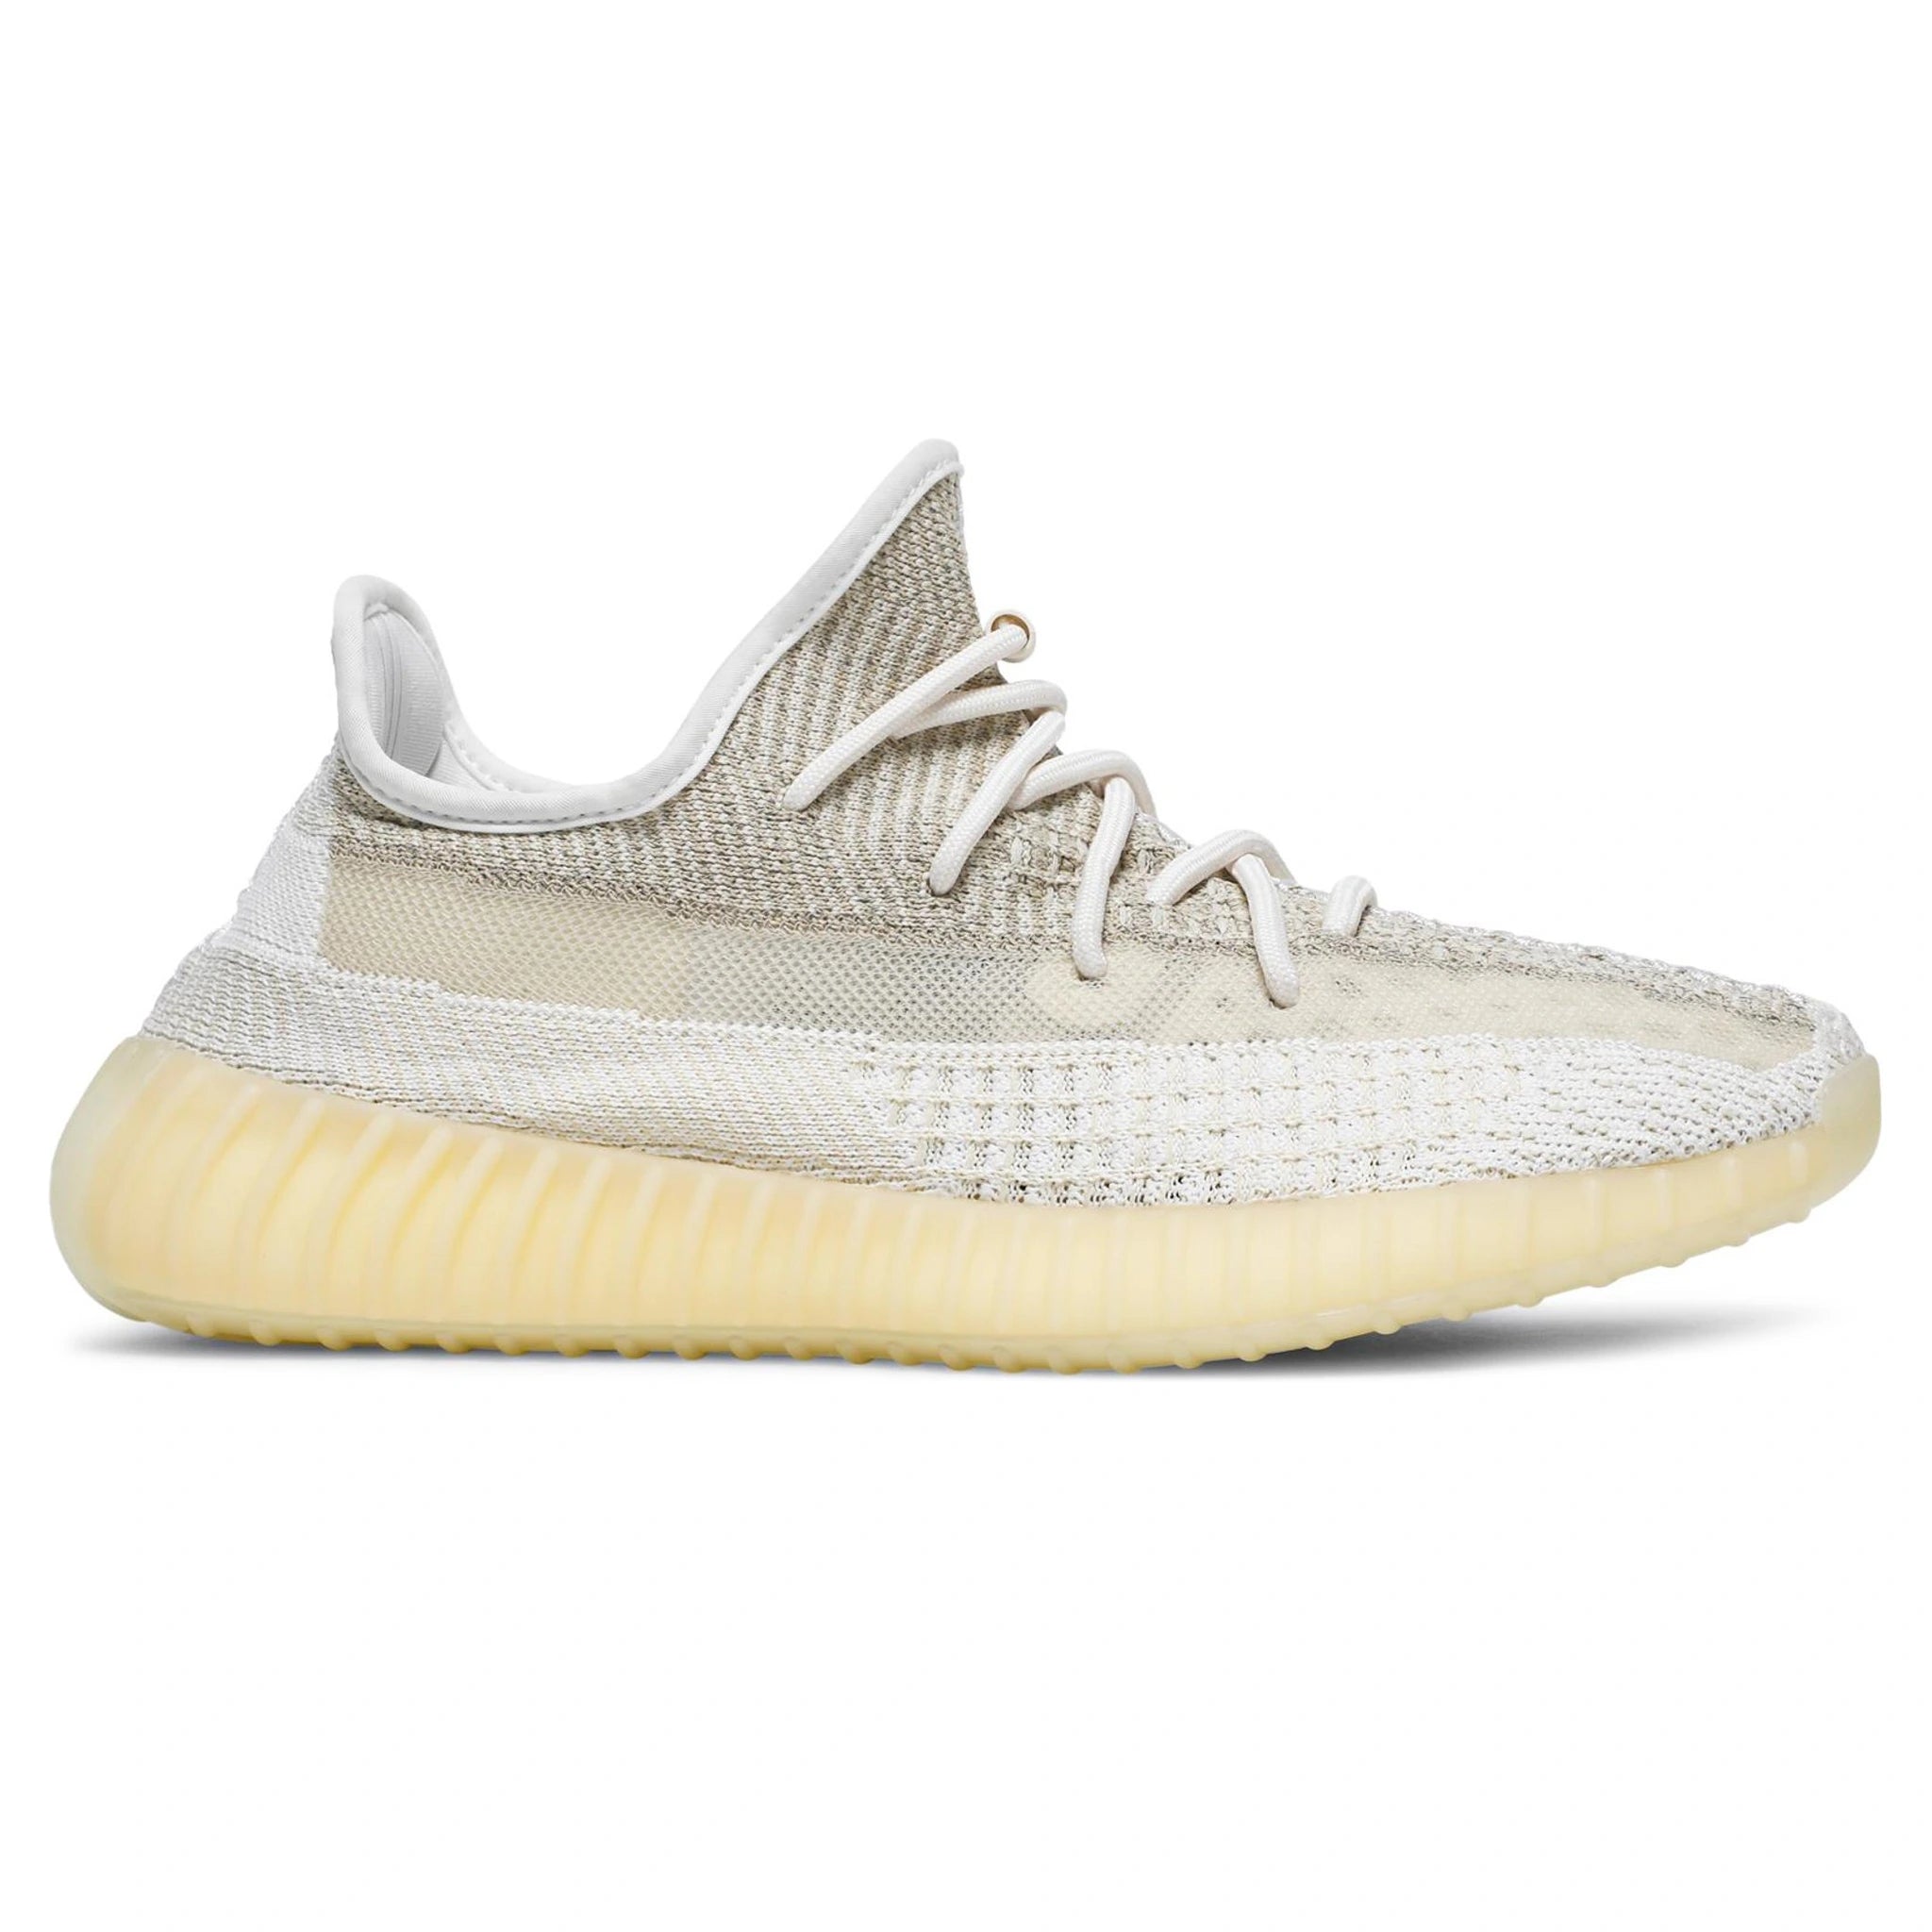 Side view of Adidas Yeezy Boost 350 V2 Natural FZ5246